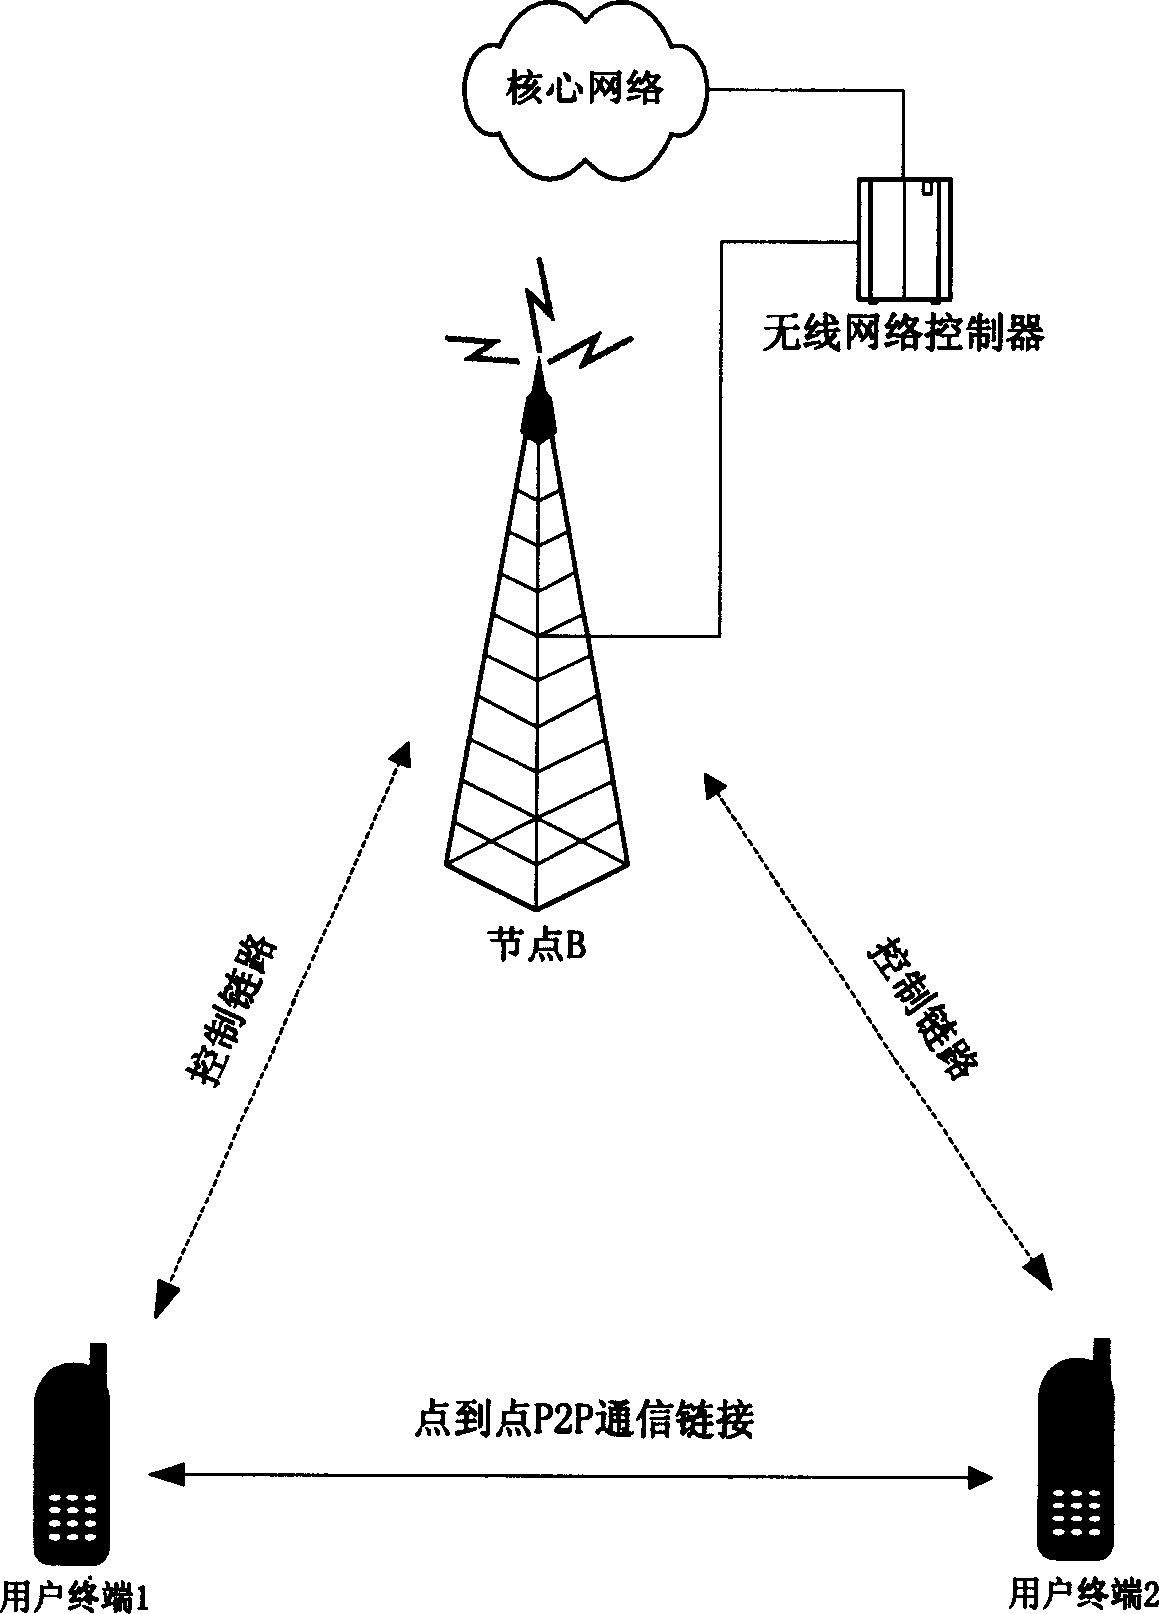 Method and apparatus for soft switching between P2P communication mode and traditional communication mode in radio communication system